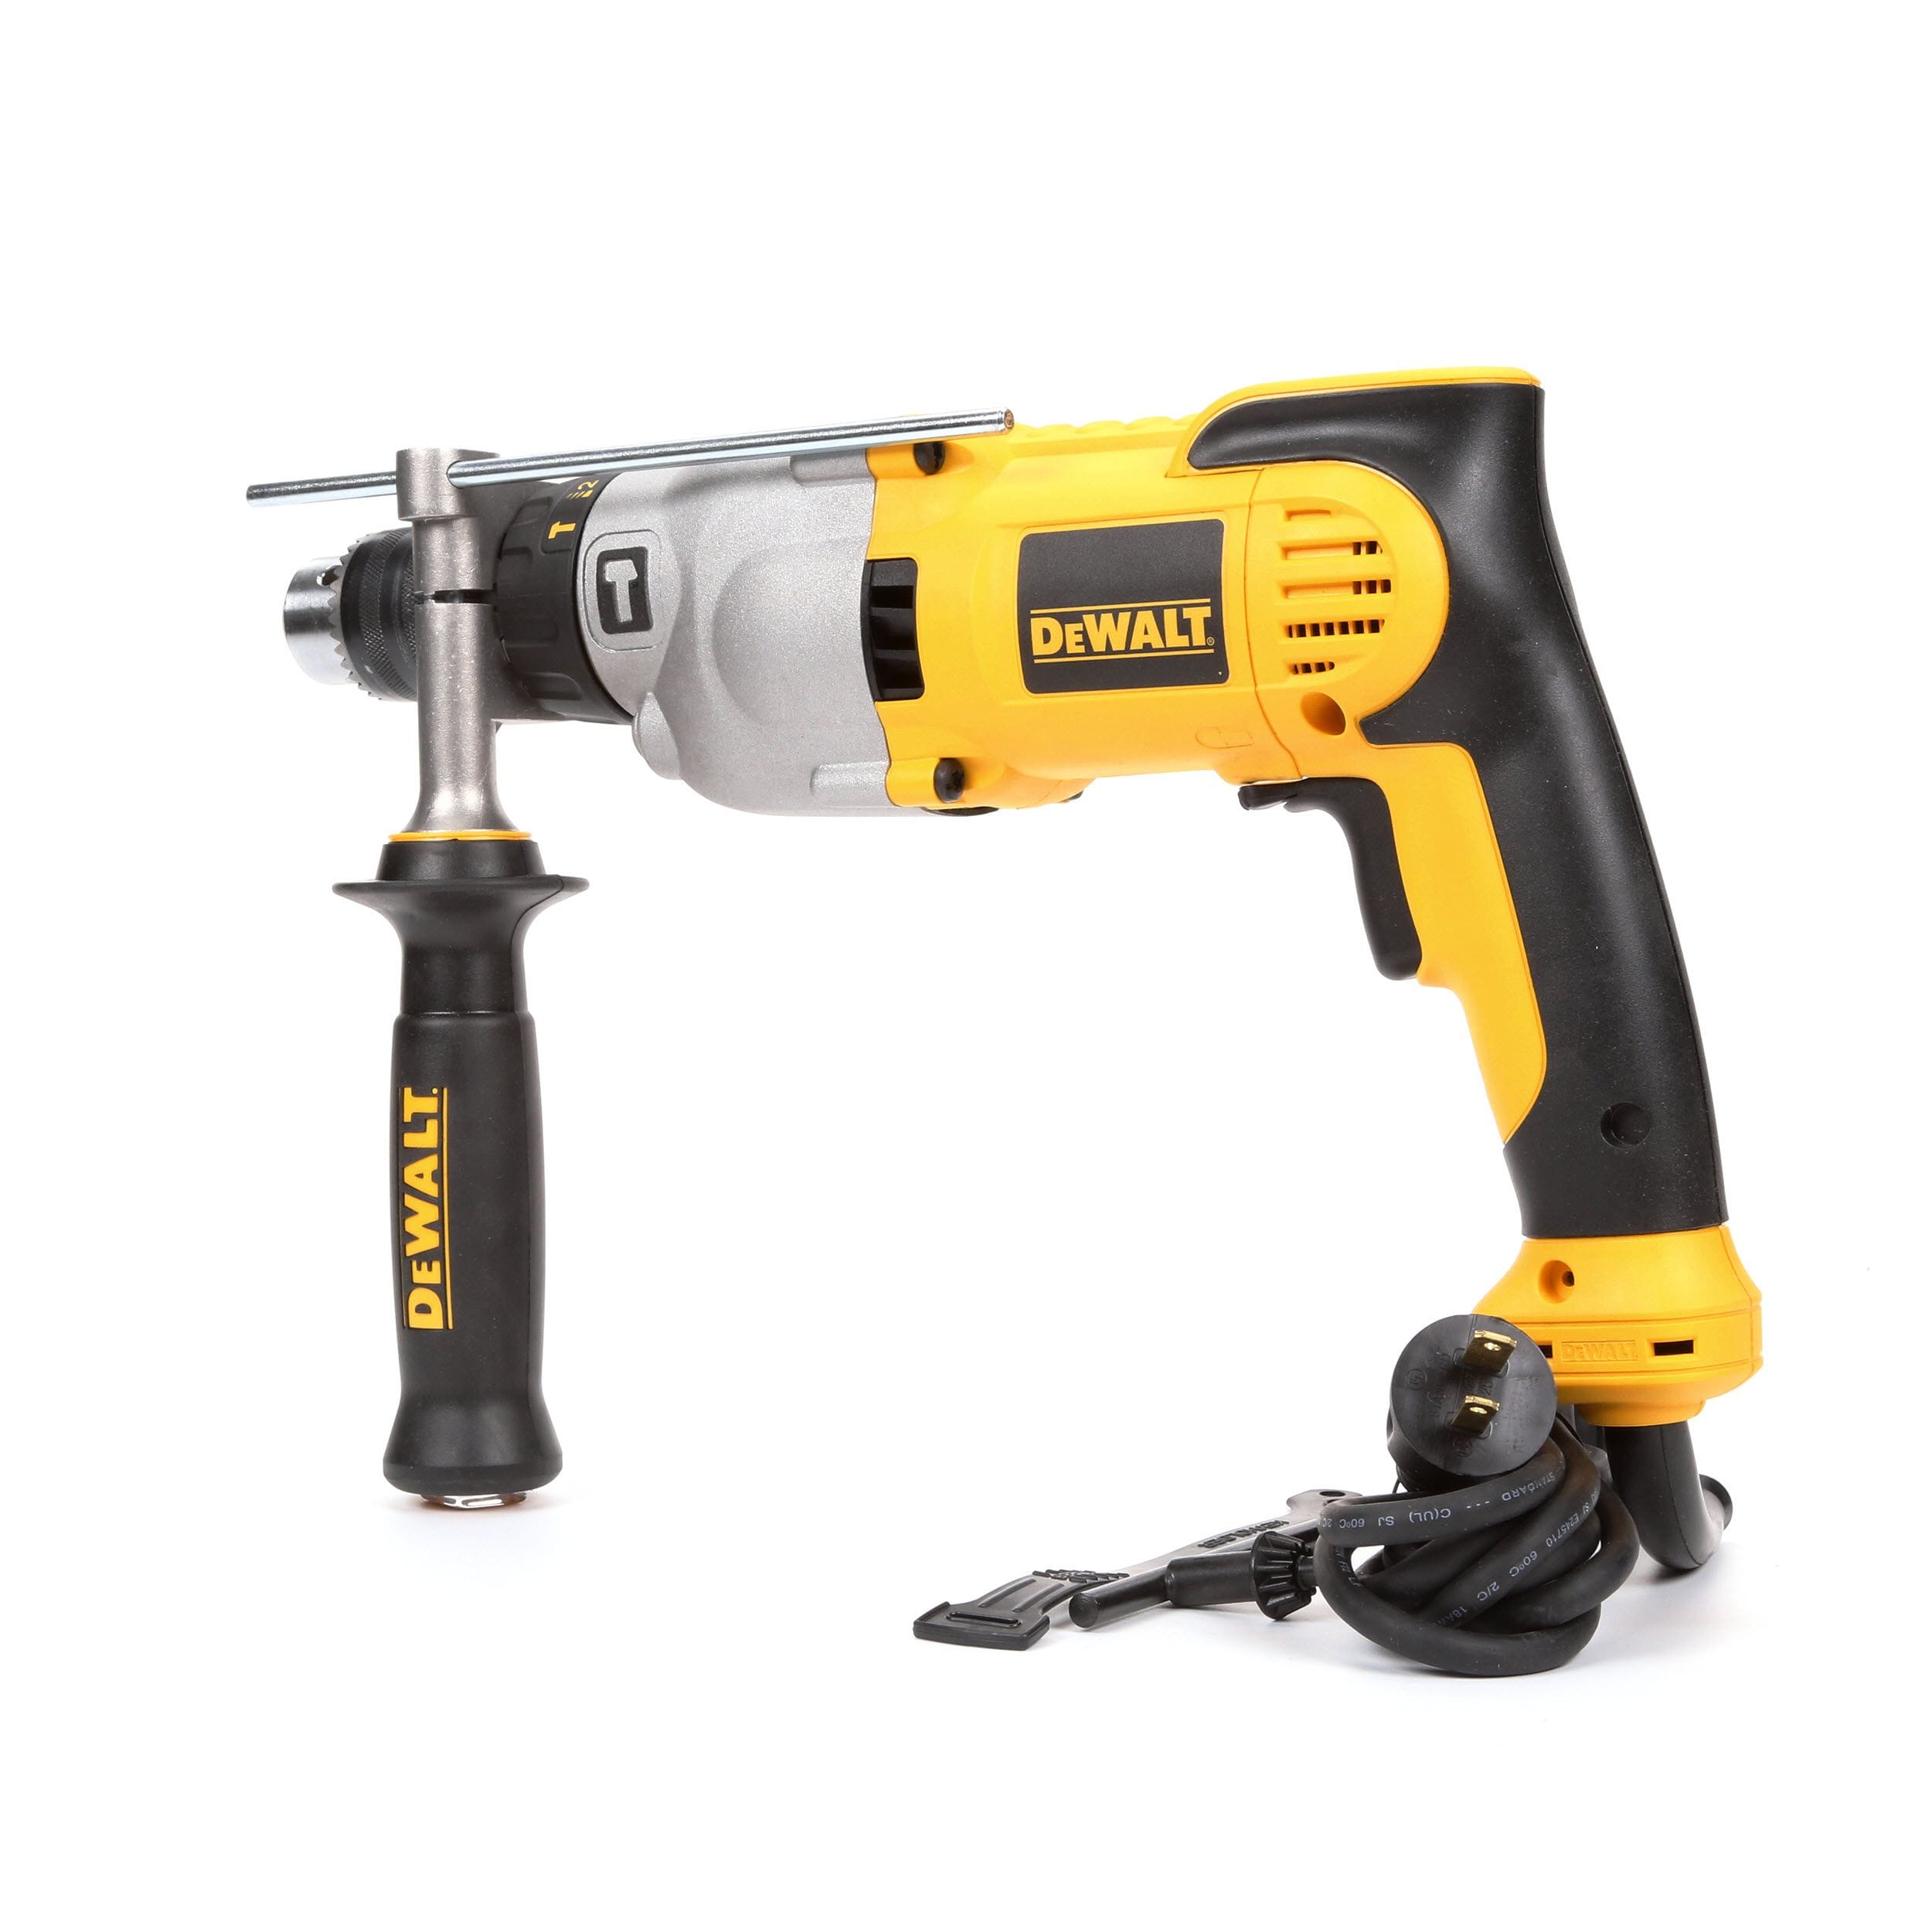 Injustice Pilfer slide DEWALT 1/2-in 10-Amp Variable Speed Corded Hammer Drill (Tool Only) in the  Hammer Drills department at Lowes.com